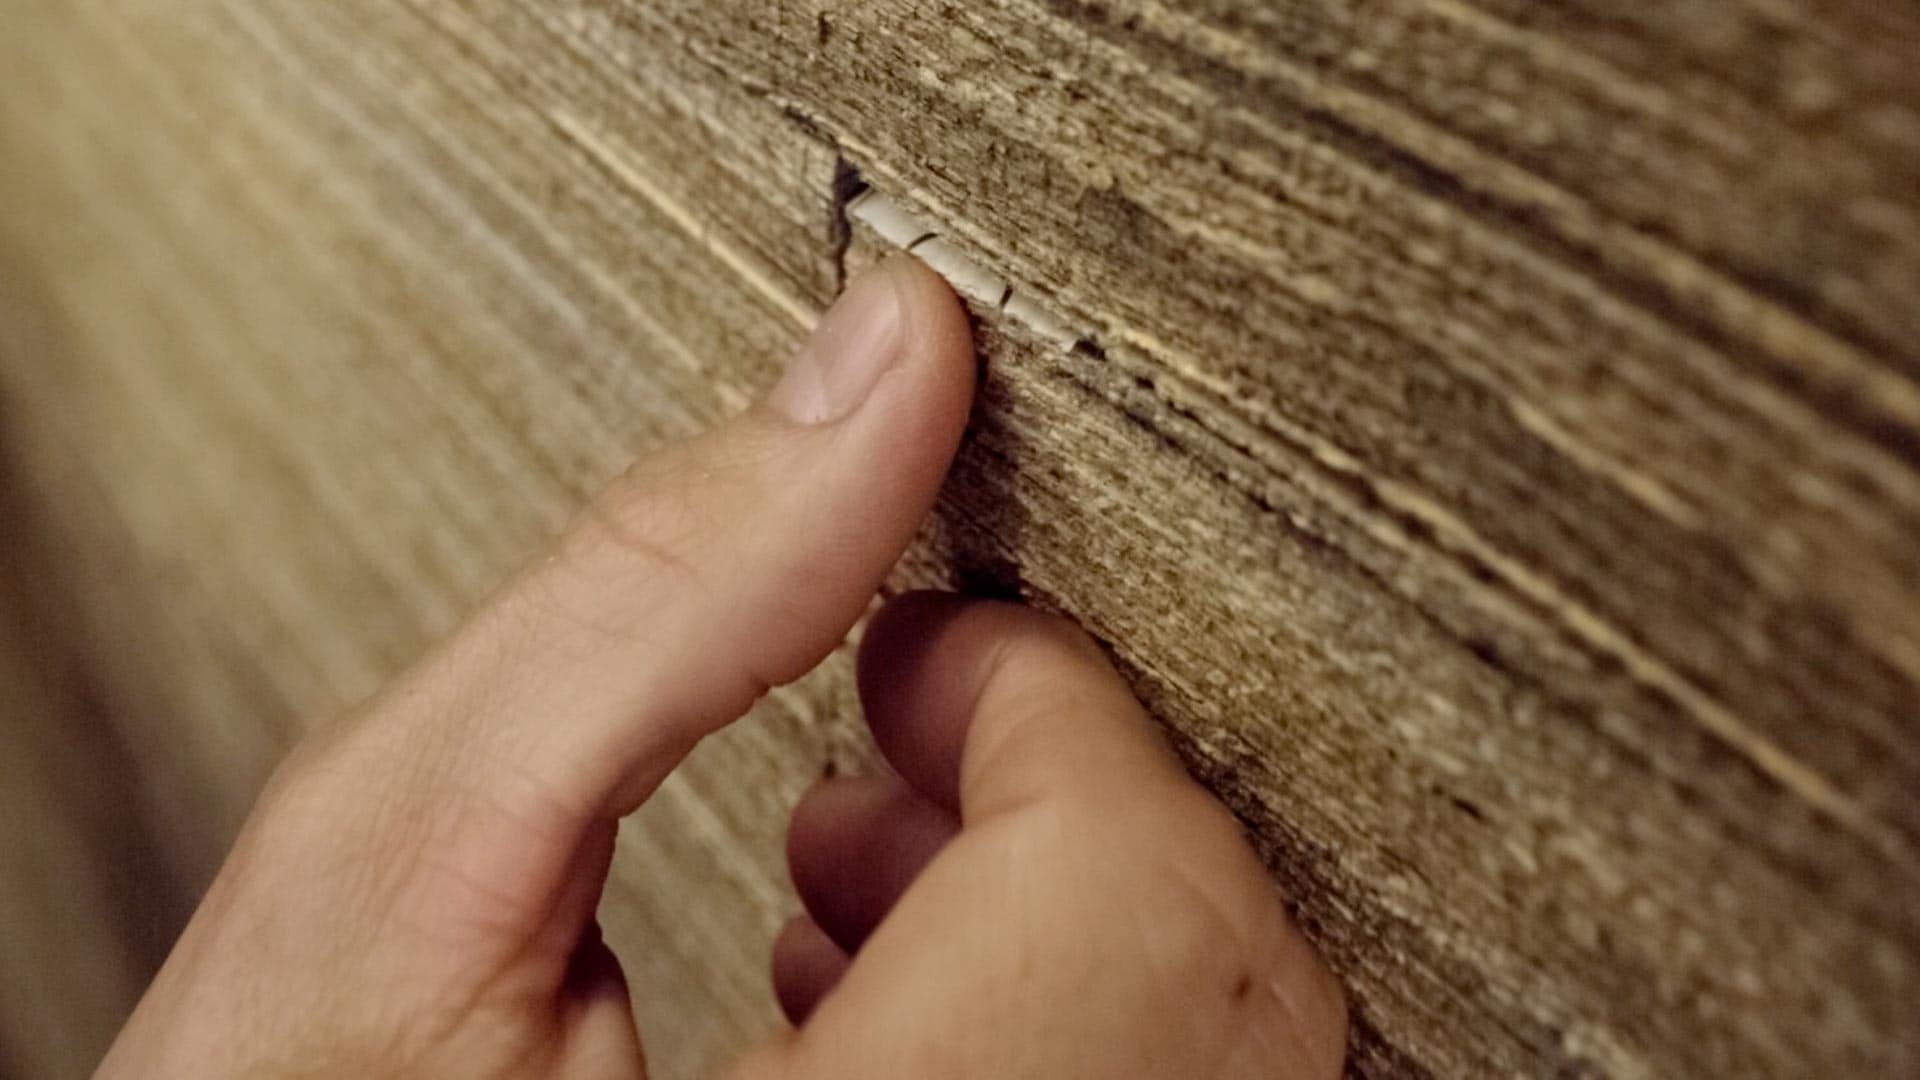 A close-up shot of a person's thumb, picking at a wooden wall.